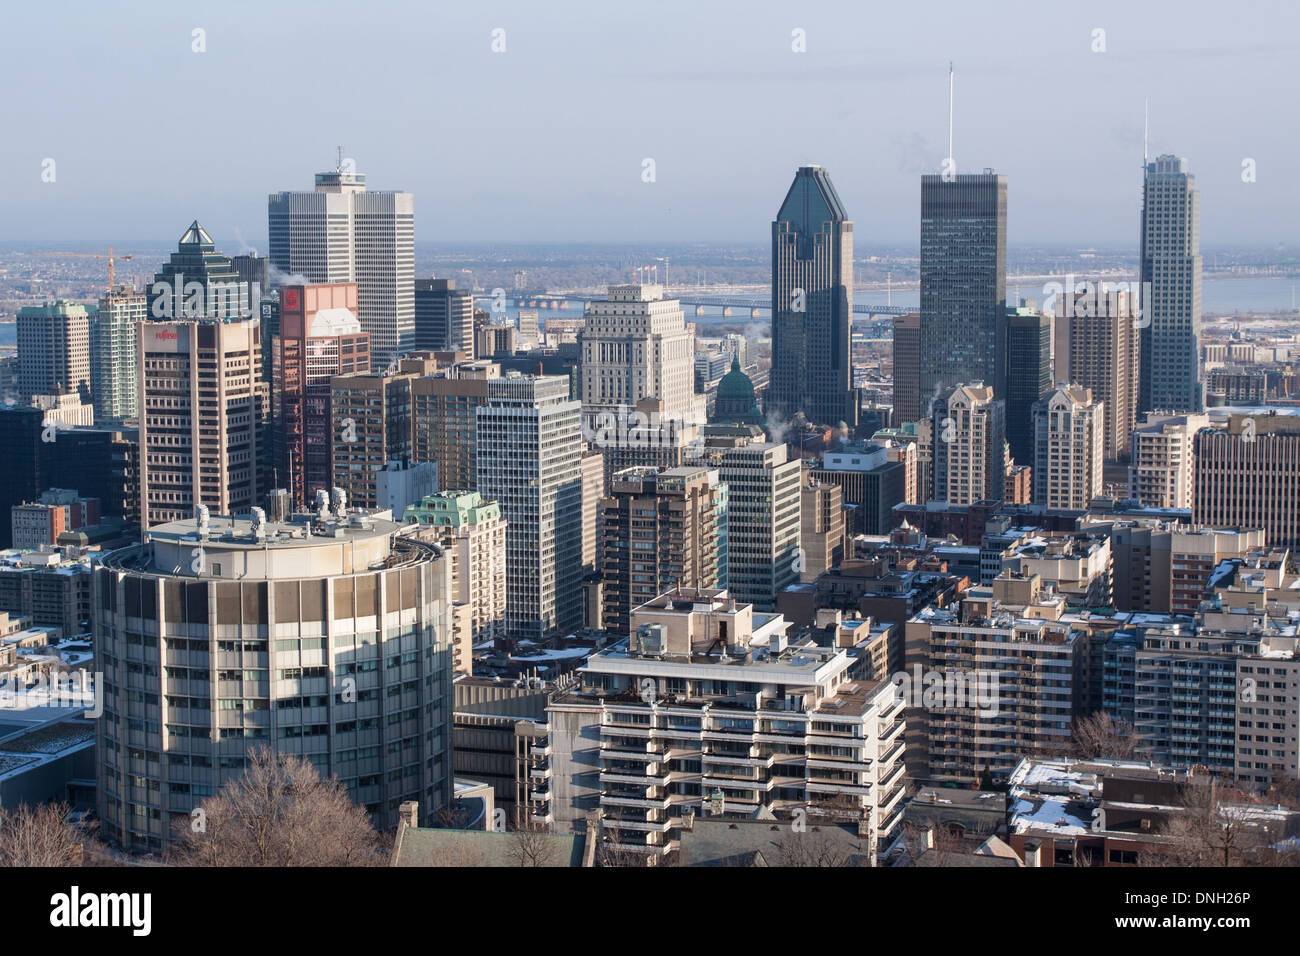 GENERAL SHOT OF DOWNTOWN MONTREAL TAKEN FROM MONT-ROYAL, PLACE VILLE MARIE NEIGHBOURHOOD, MONTREAL, QUEBEC, CANADA Stock Photo